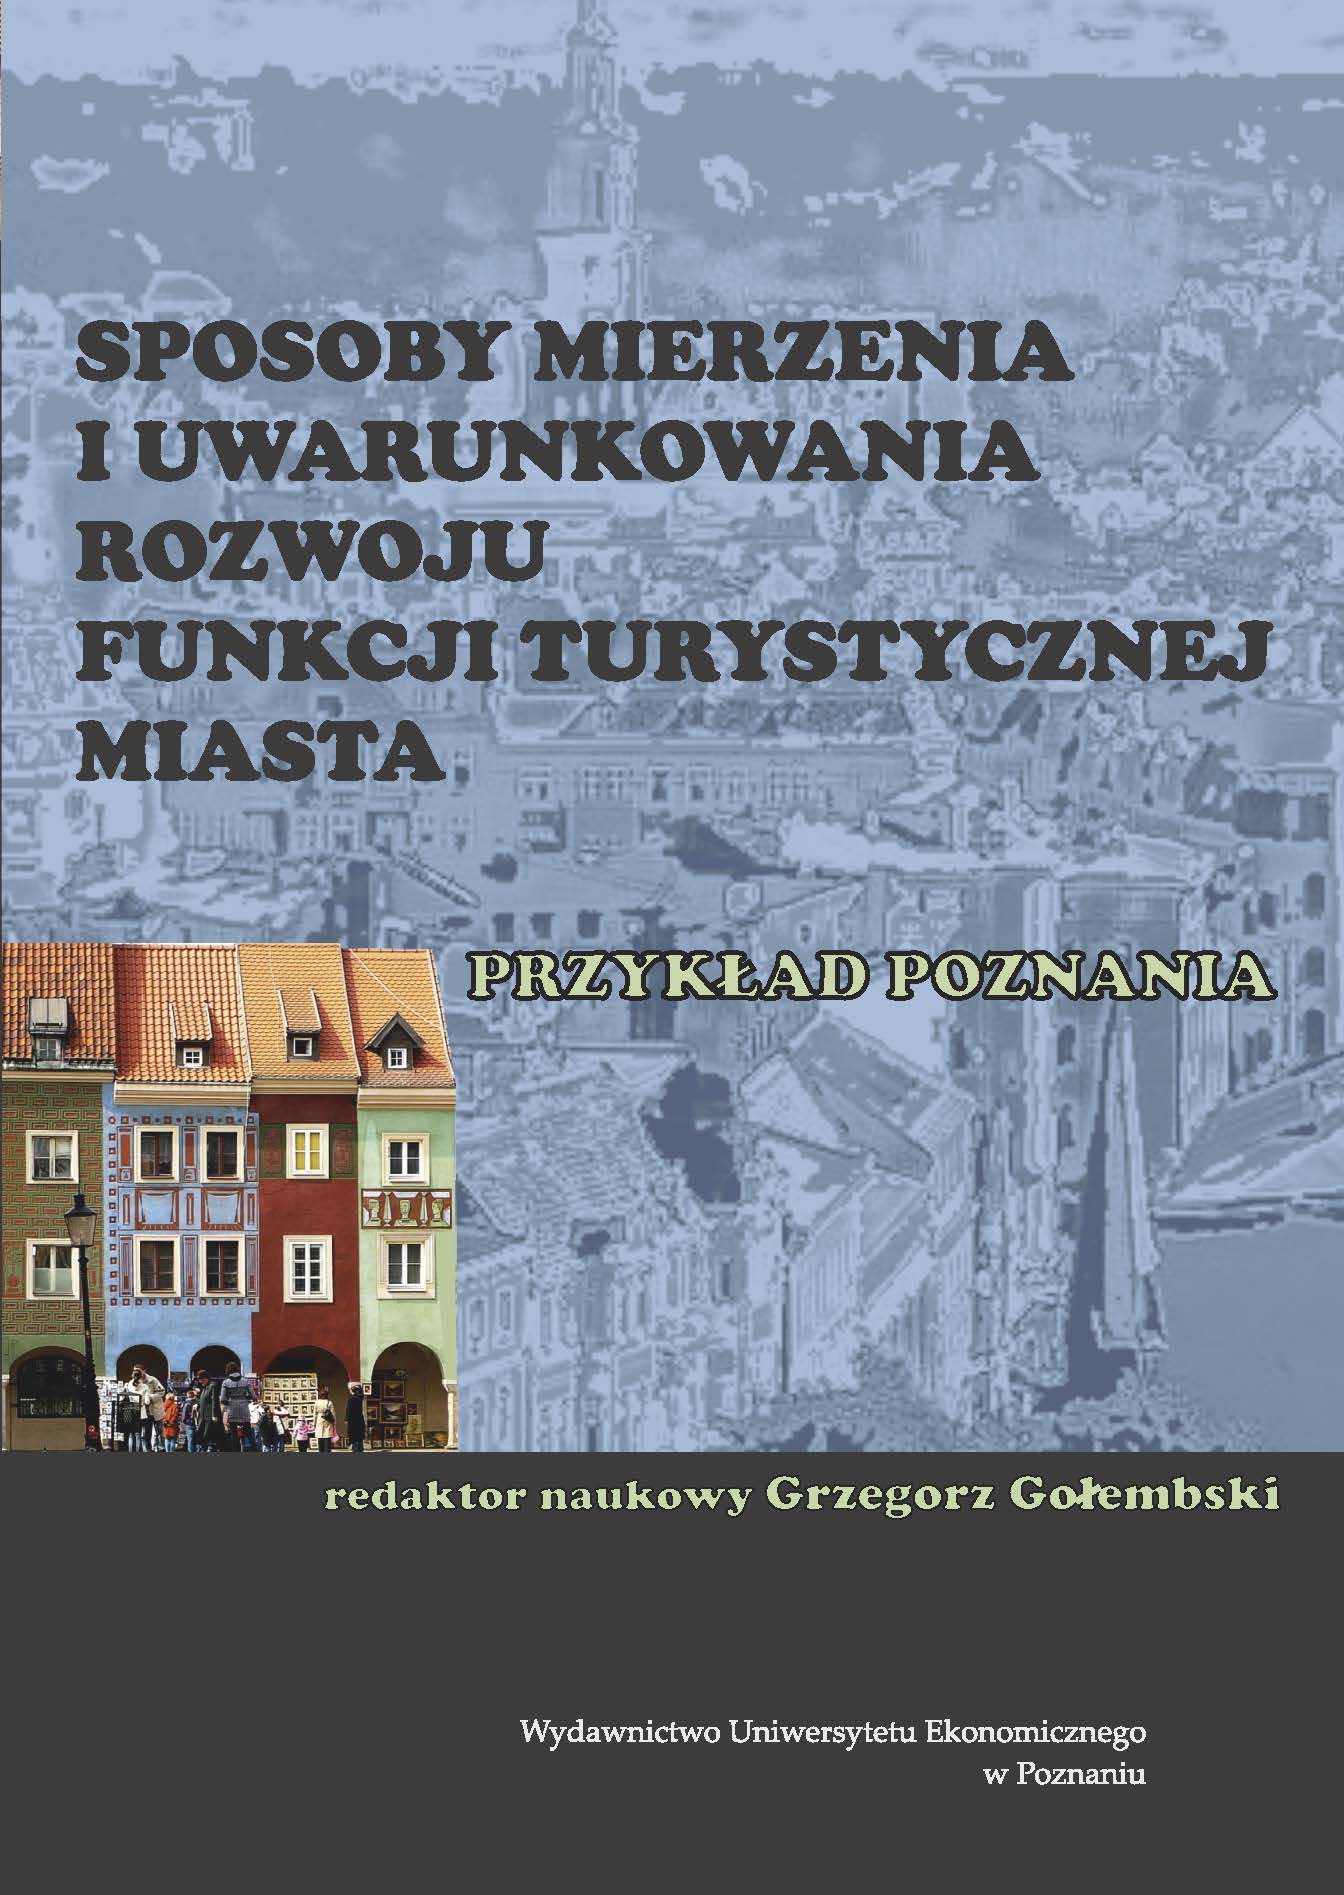 Determinants of tourism development in urban destinastions and methods of tourism measurement: The case of Poznań Cover Image